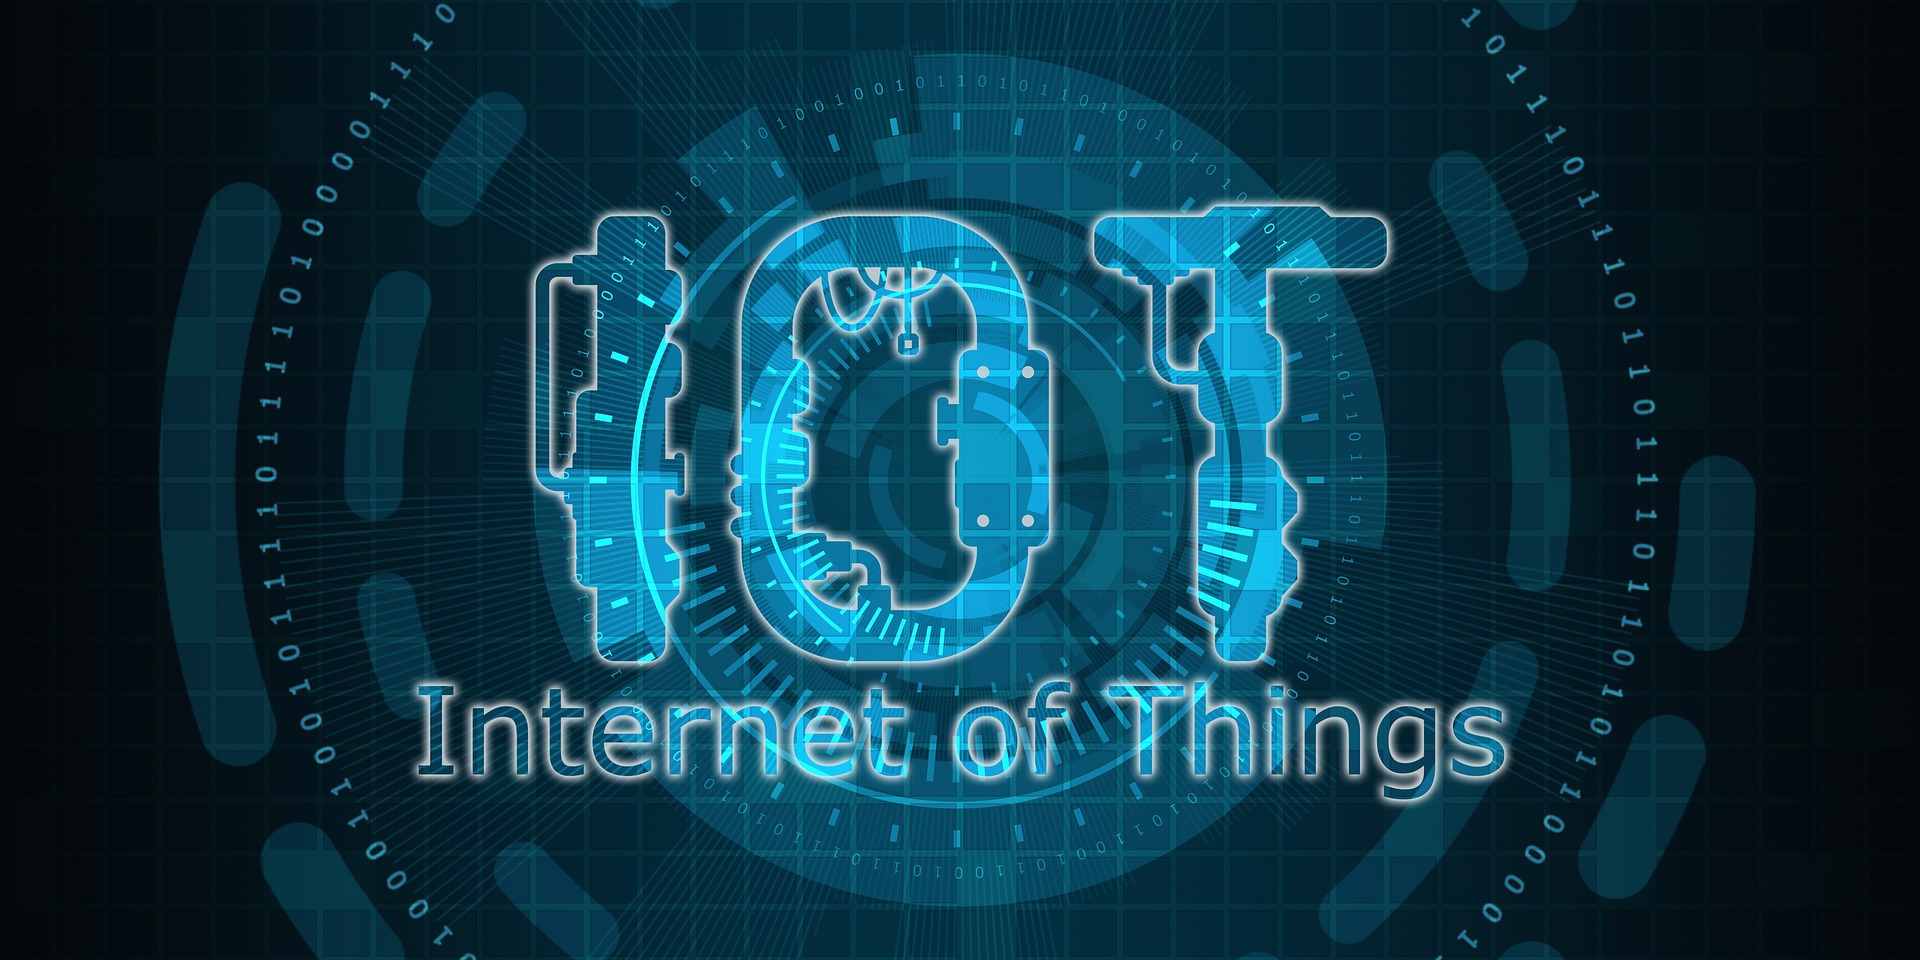 A Simple Explanation of What Internet of Things (IoT) Means